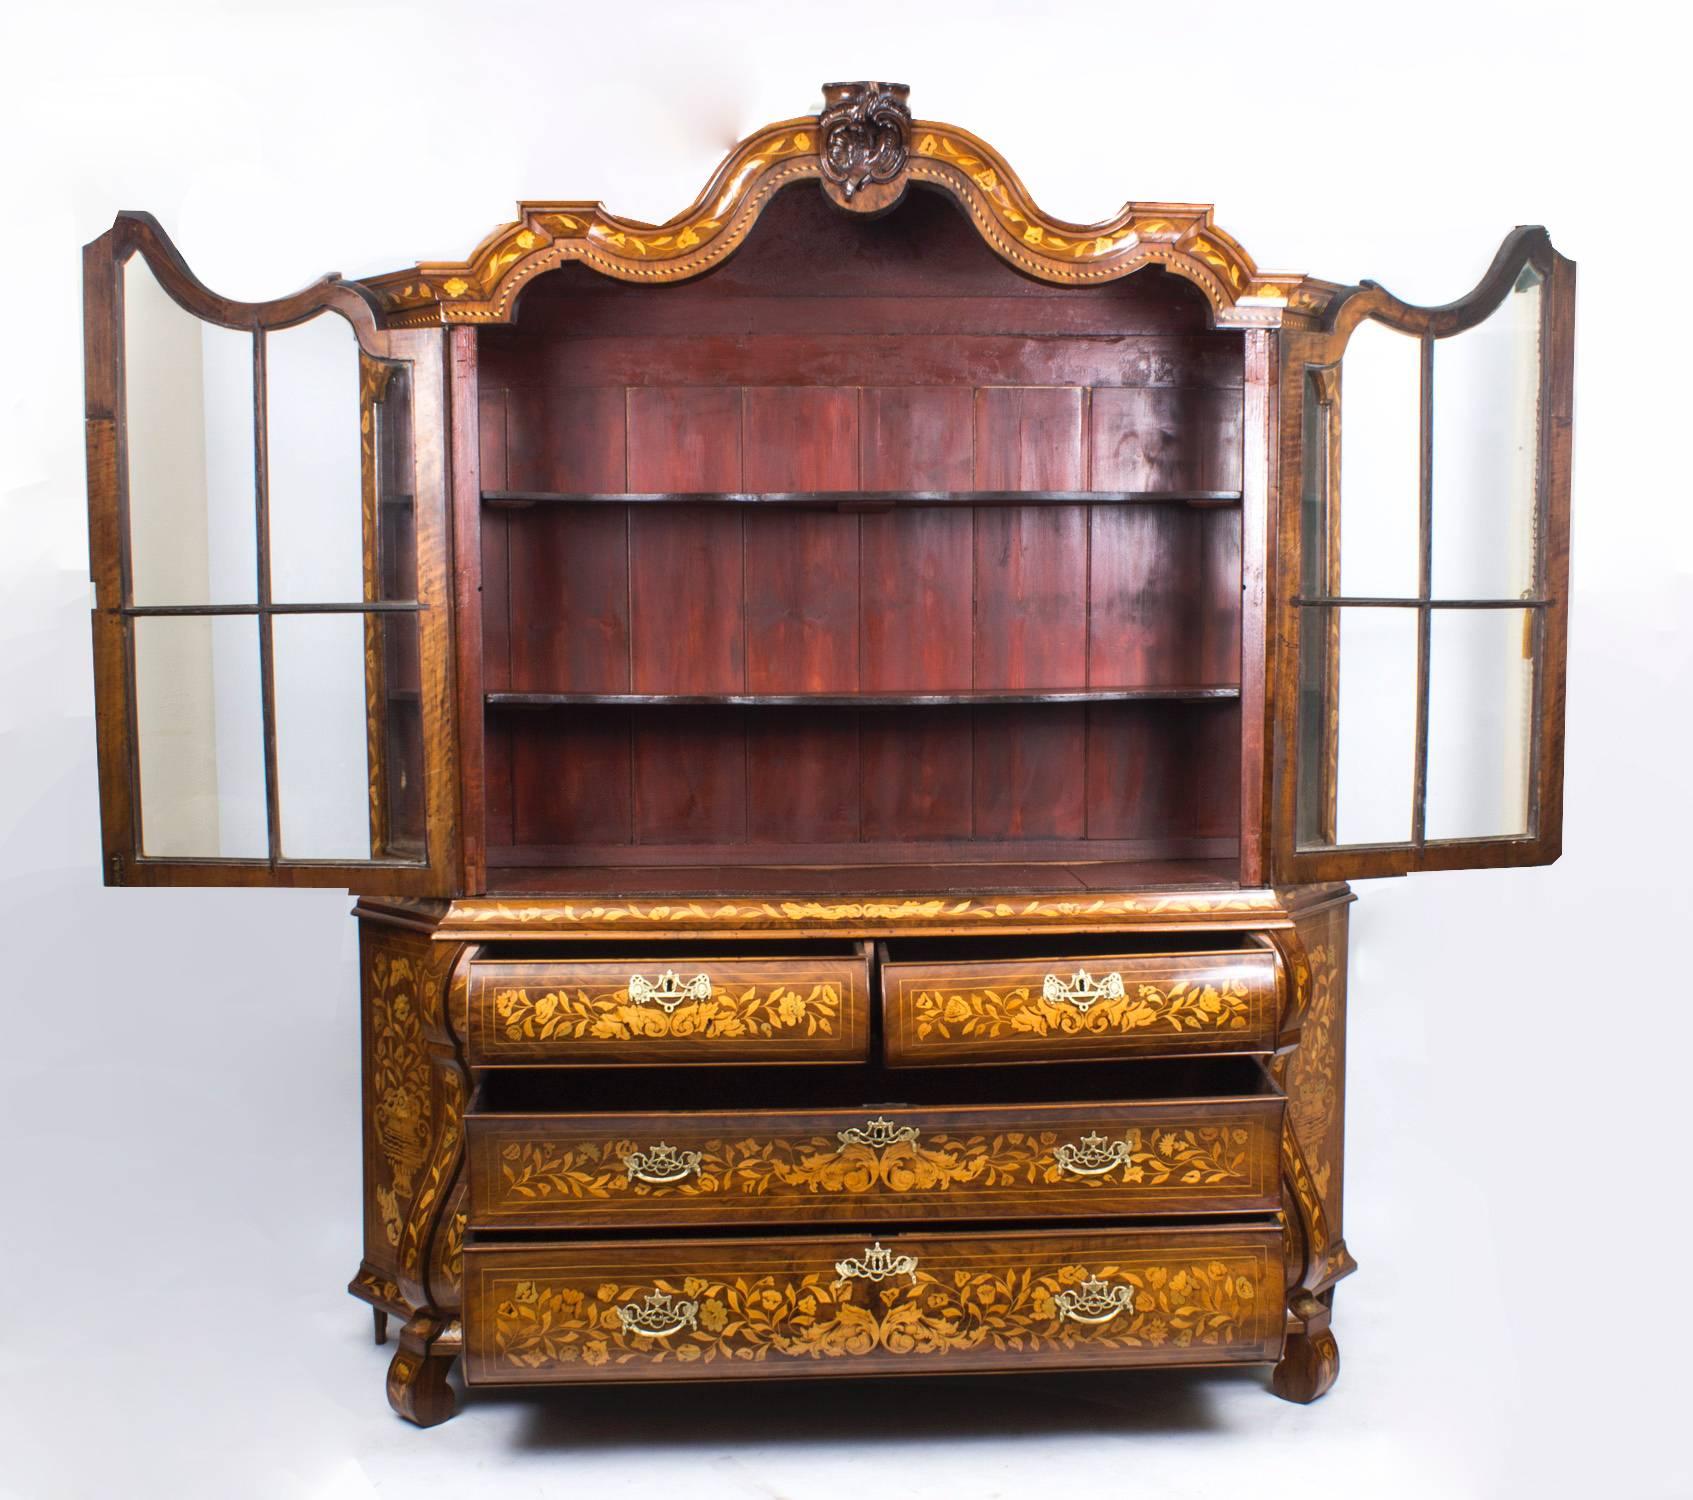 This is a stunning antique Dutch marquetry walnut bombe display cabinet, circa 1780 in date. 

It features the most wonderful hand cut floral marquetry, the central pair of glazed upper doors open to reveal two full width shelves, the canted